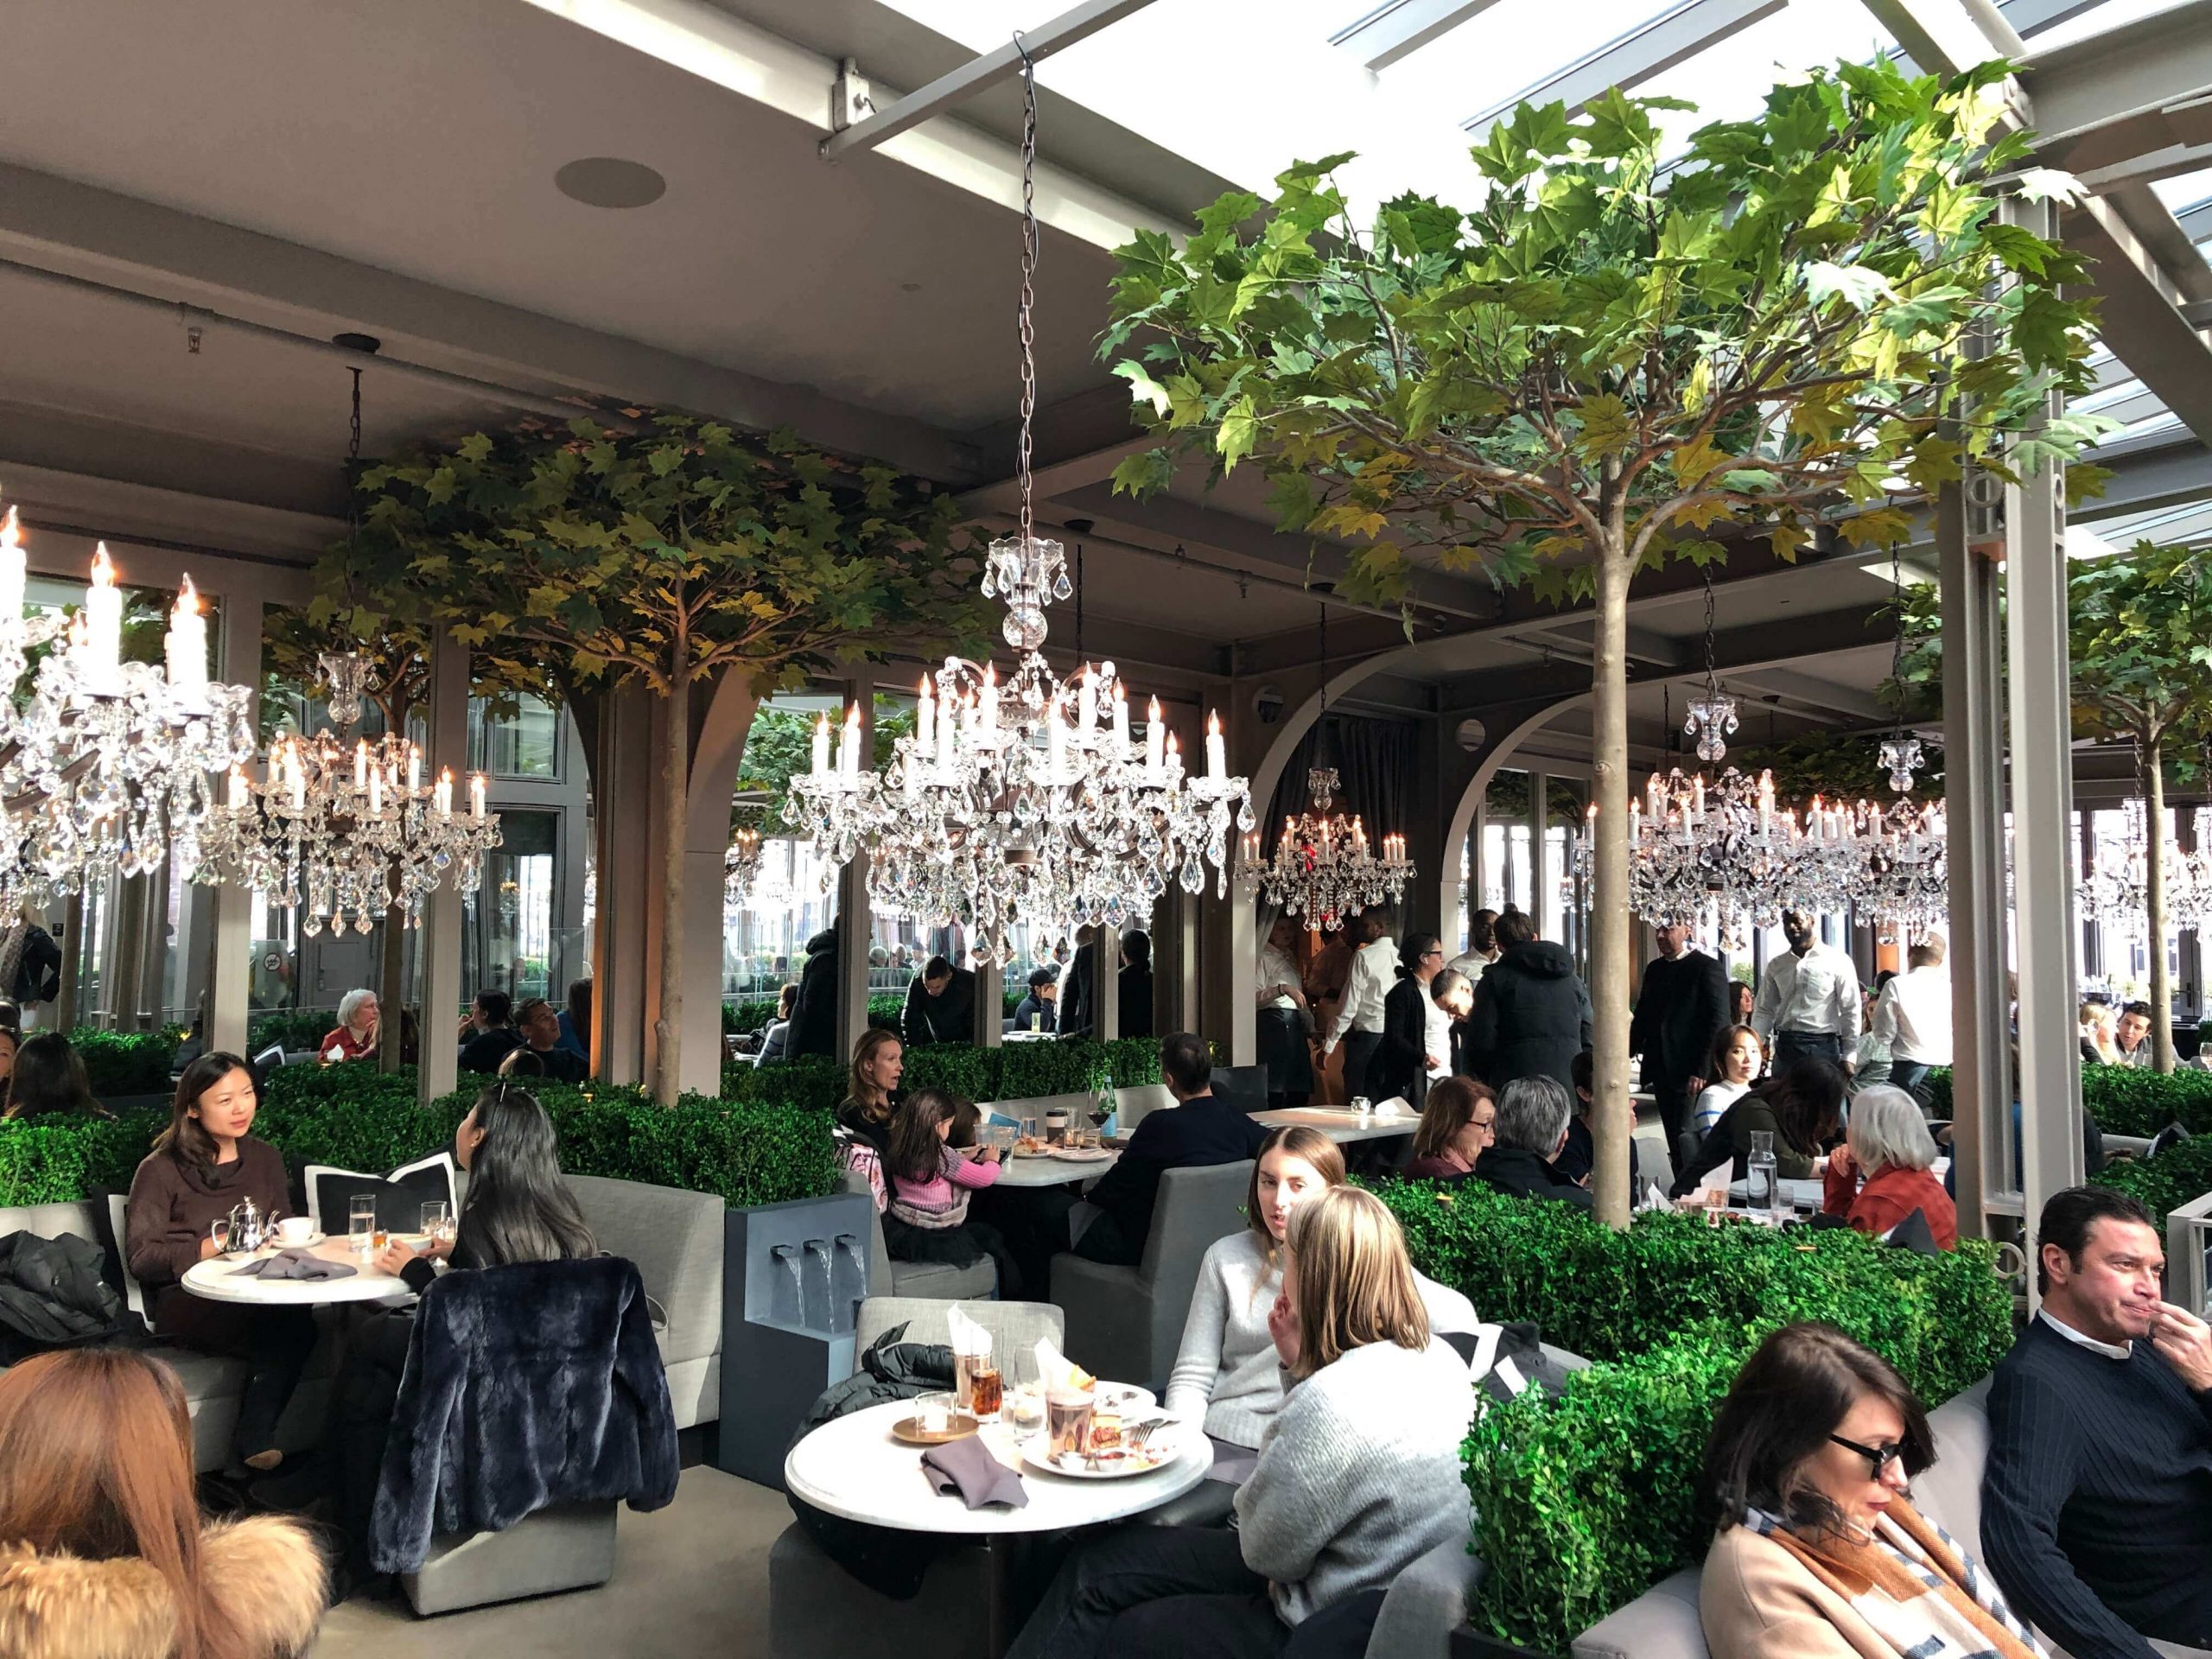 Fabricated London Planetrees and Boxwood Hedges in dining area at RH Restaurant New York